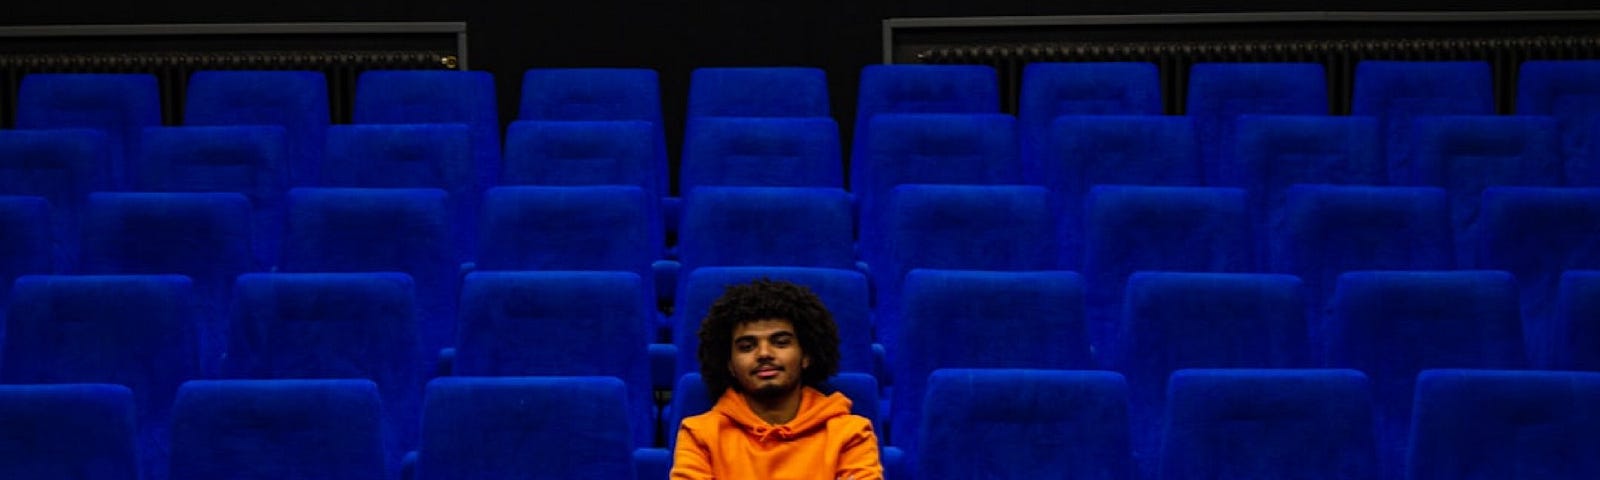 Marius GIRE took this photo of a man in an orange hoodie sitting alone in an empty movie theater.